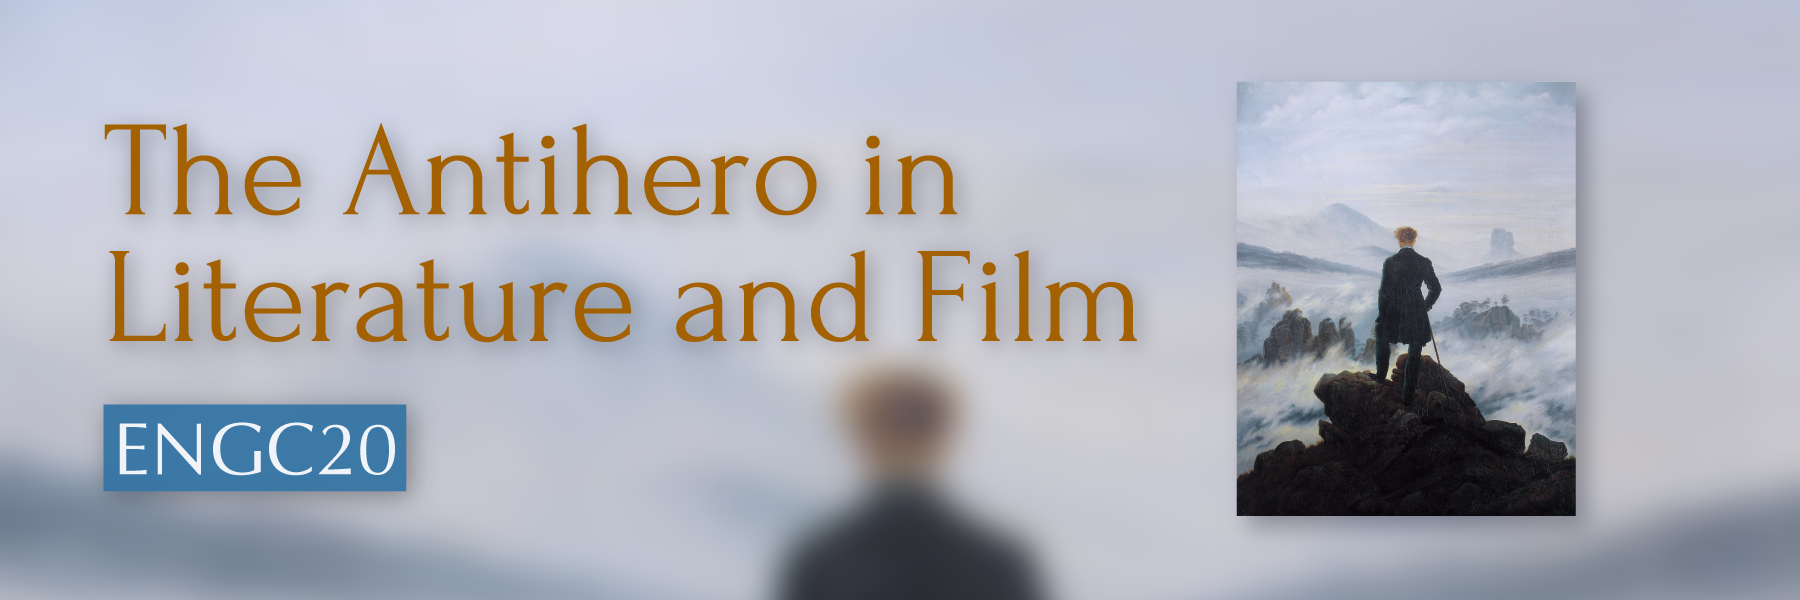 ENGC20: The Antihero in Literature and Film - person standing on a mountain